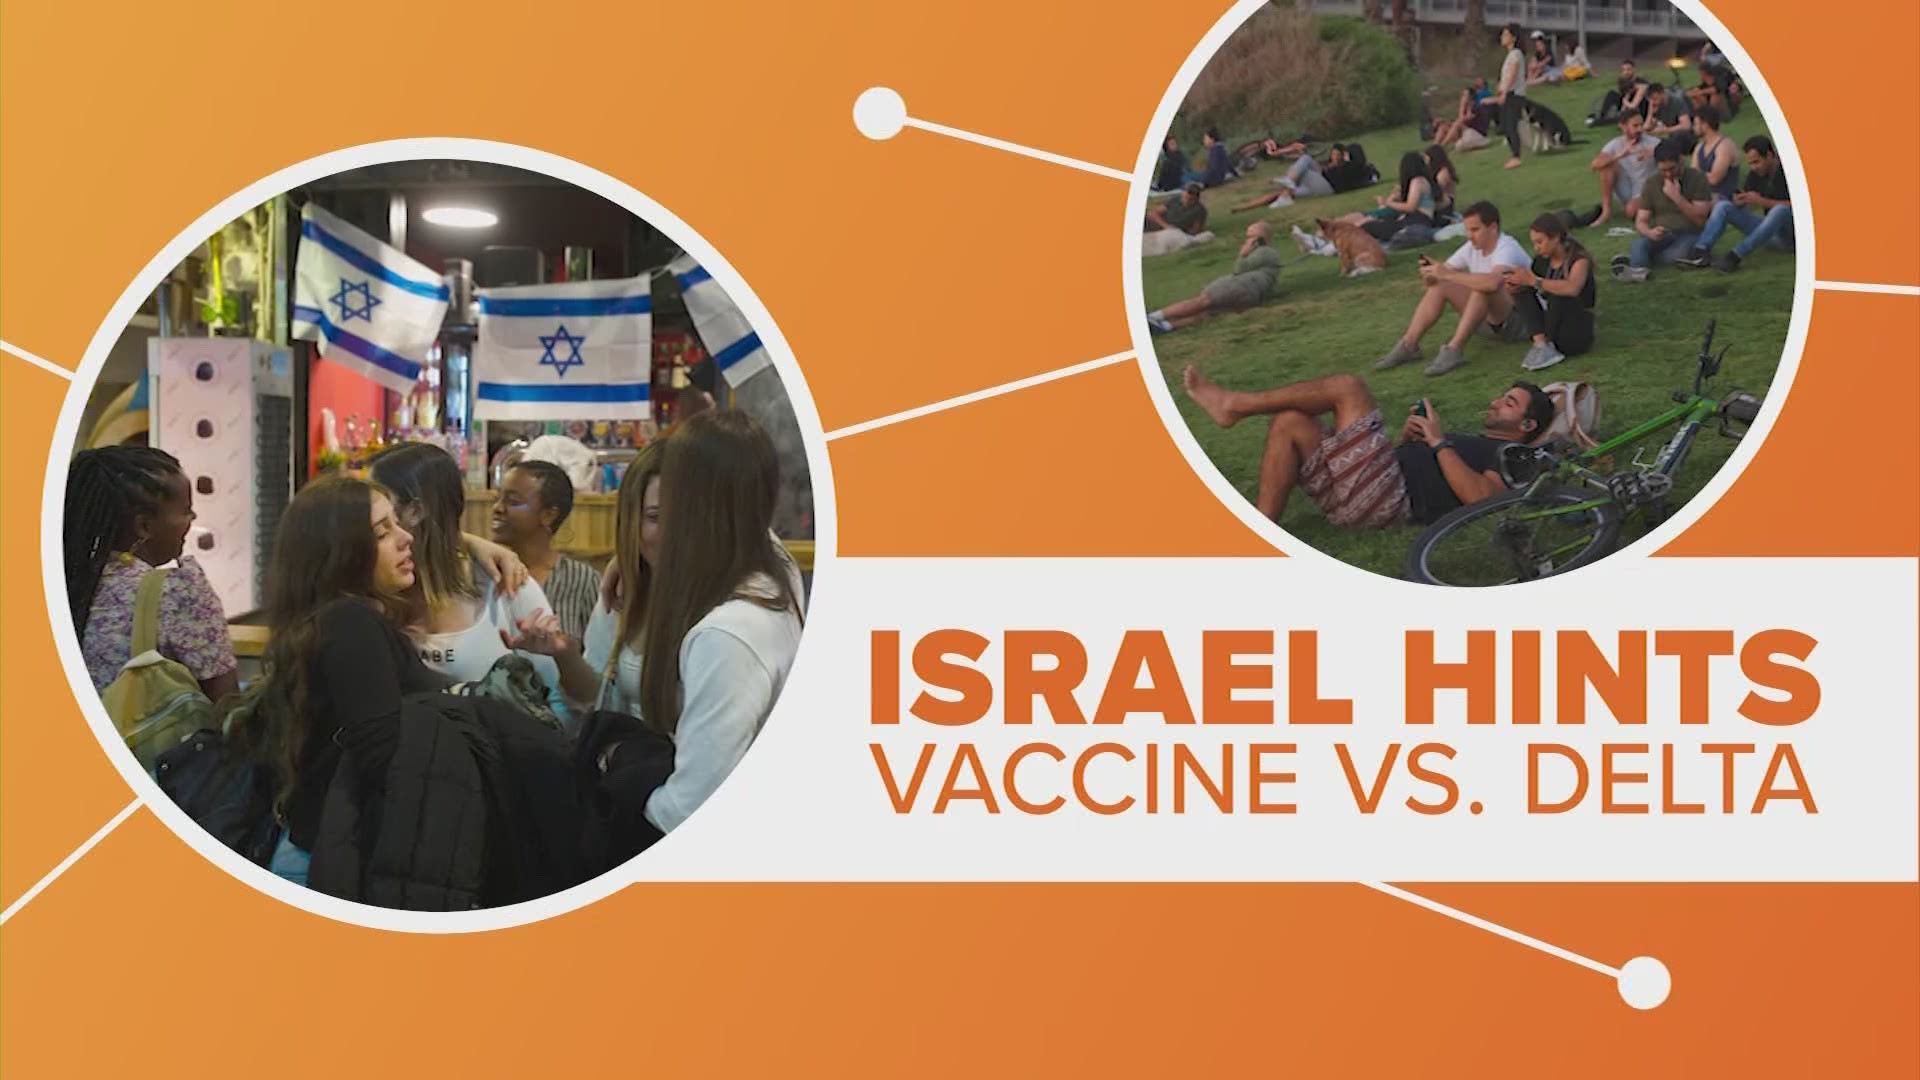 The Israeli government says data shows the Pfizer vaccine is 64 percent effective against the Delta variant compared to it being 95 percent effective back in May.